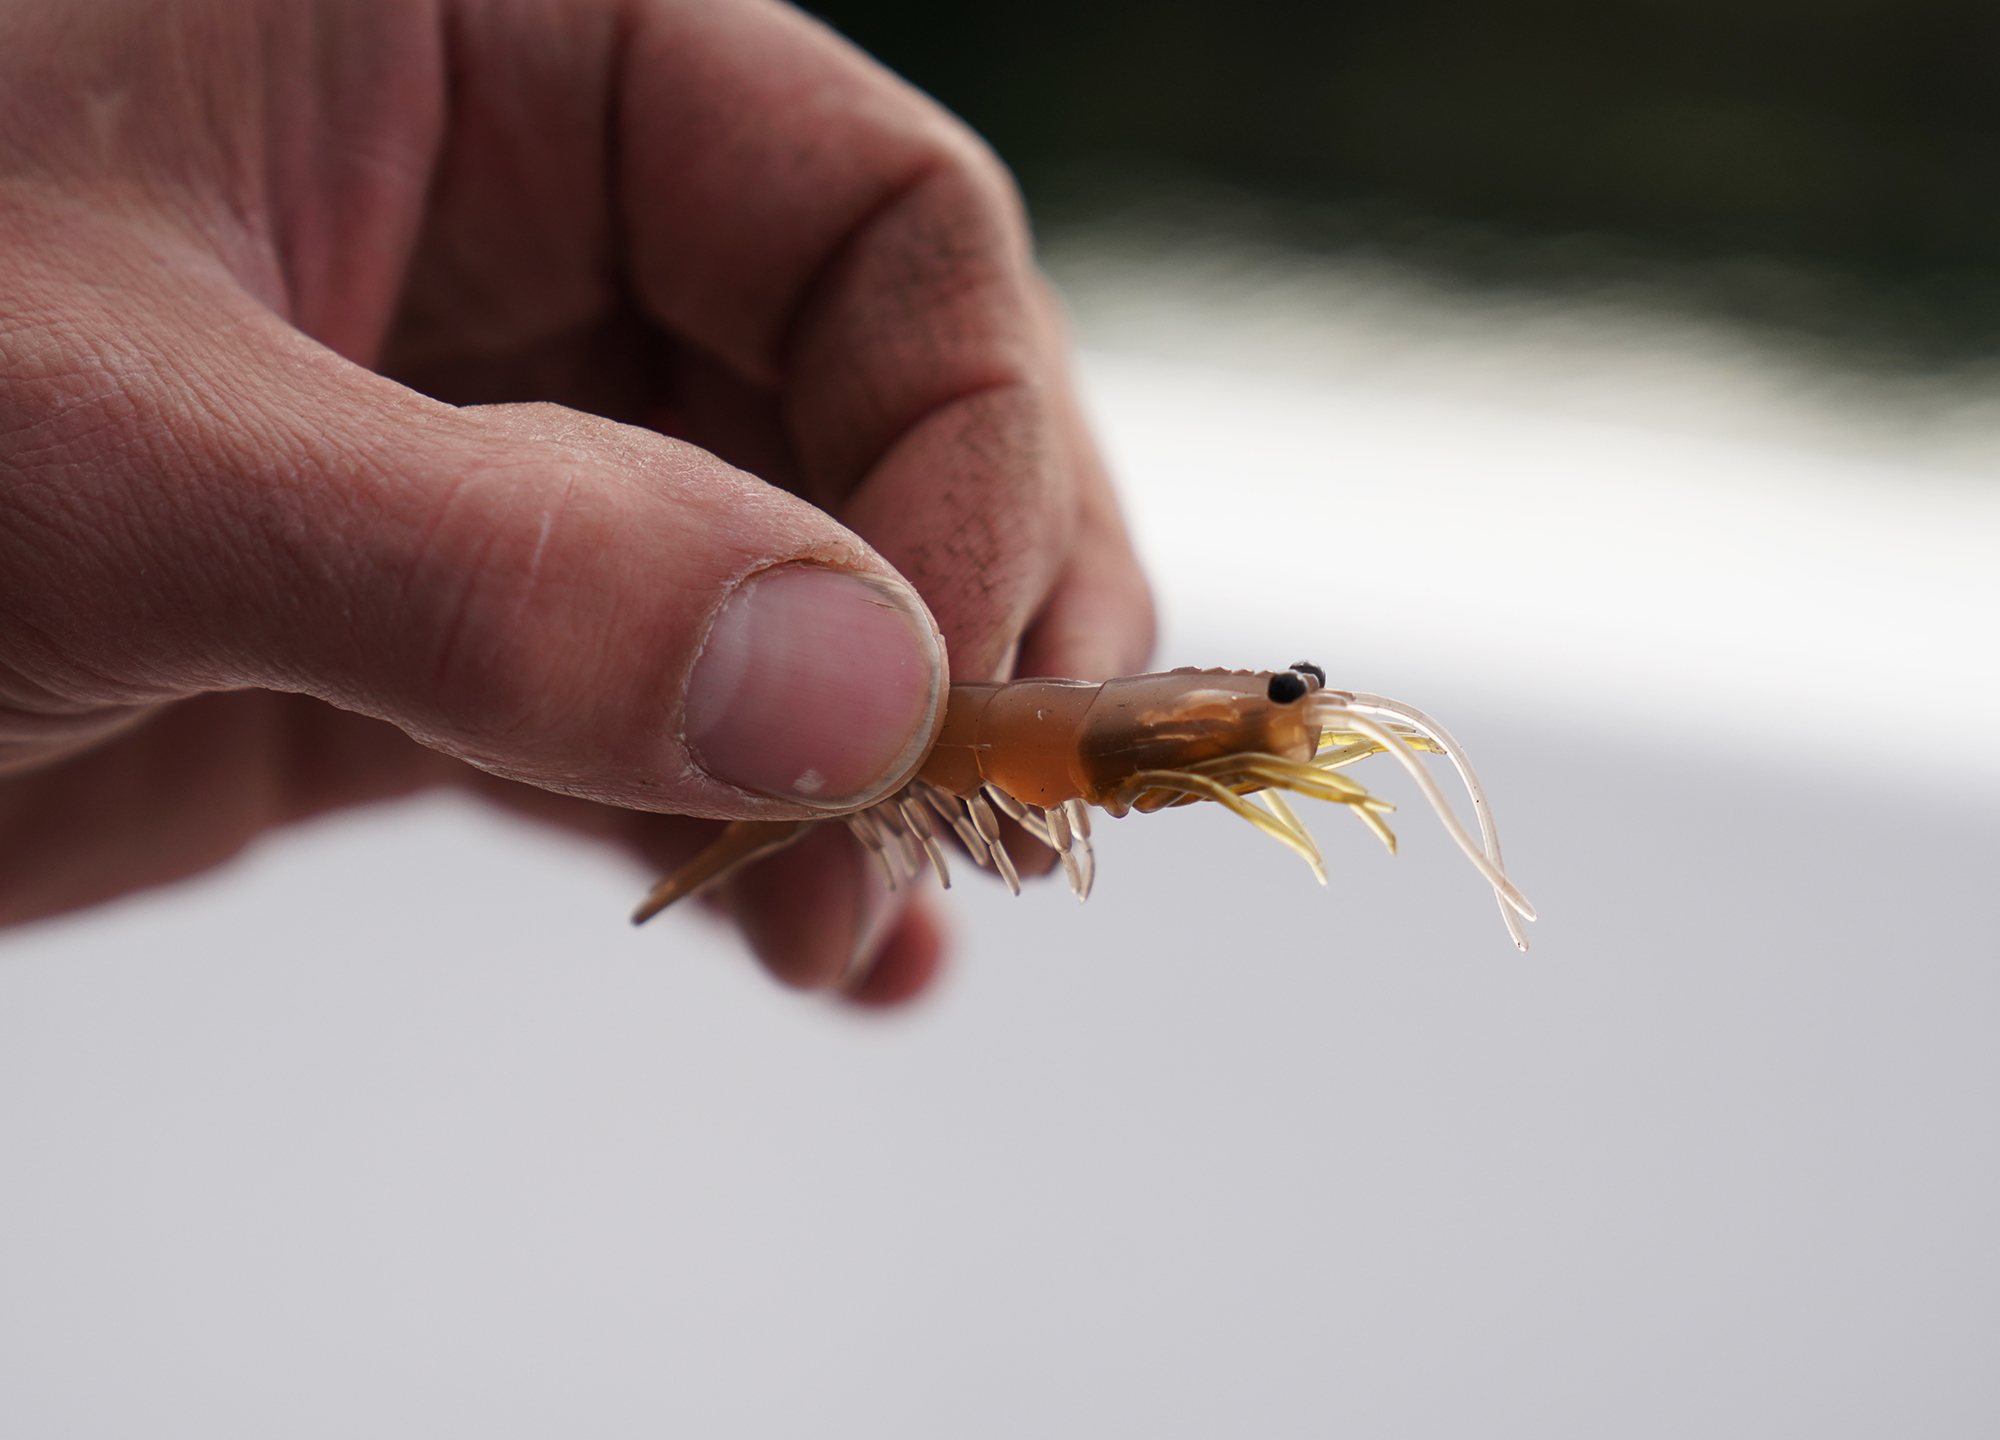 Pro Lure Clone Prawn – Trophy Trout Lures and Fly Fishing